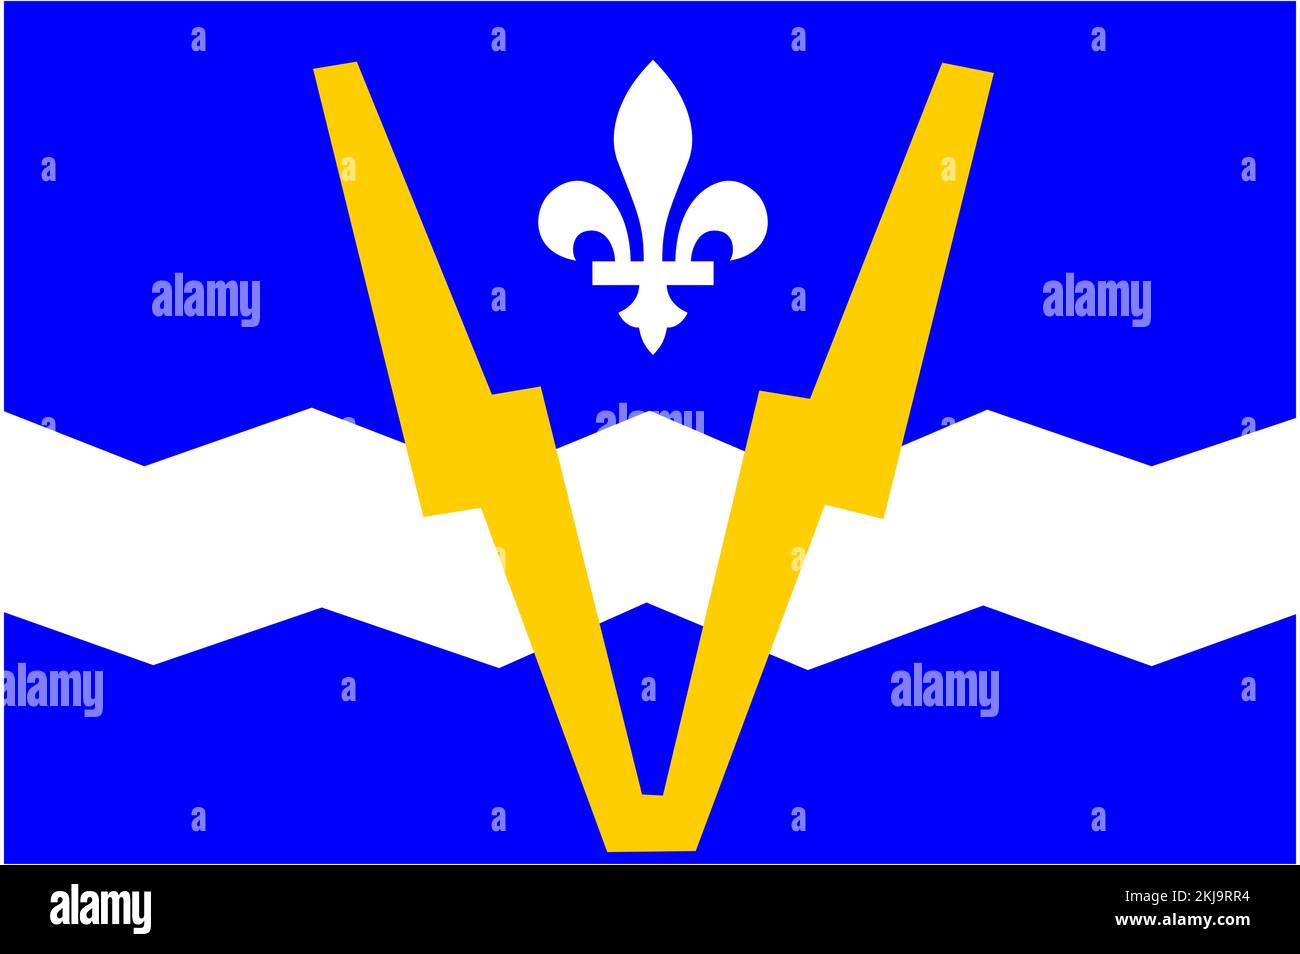 Top view of flag Shawinigan 1951 2009, Quebec Canada. Canadian travel and patriot concept. no flagpole. Plane layout, design. Flag background Stock Photo